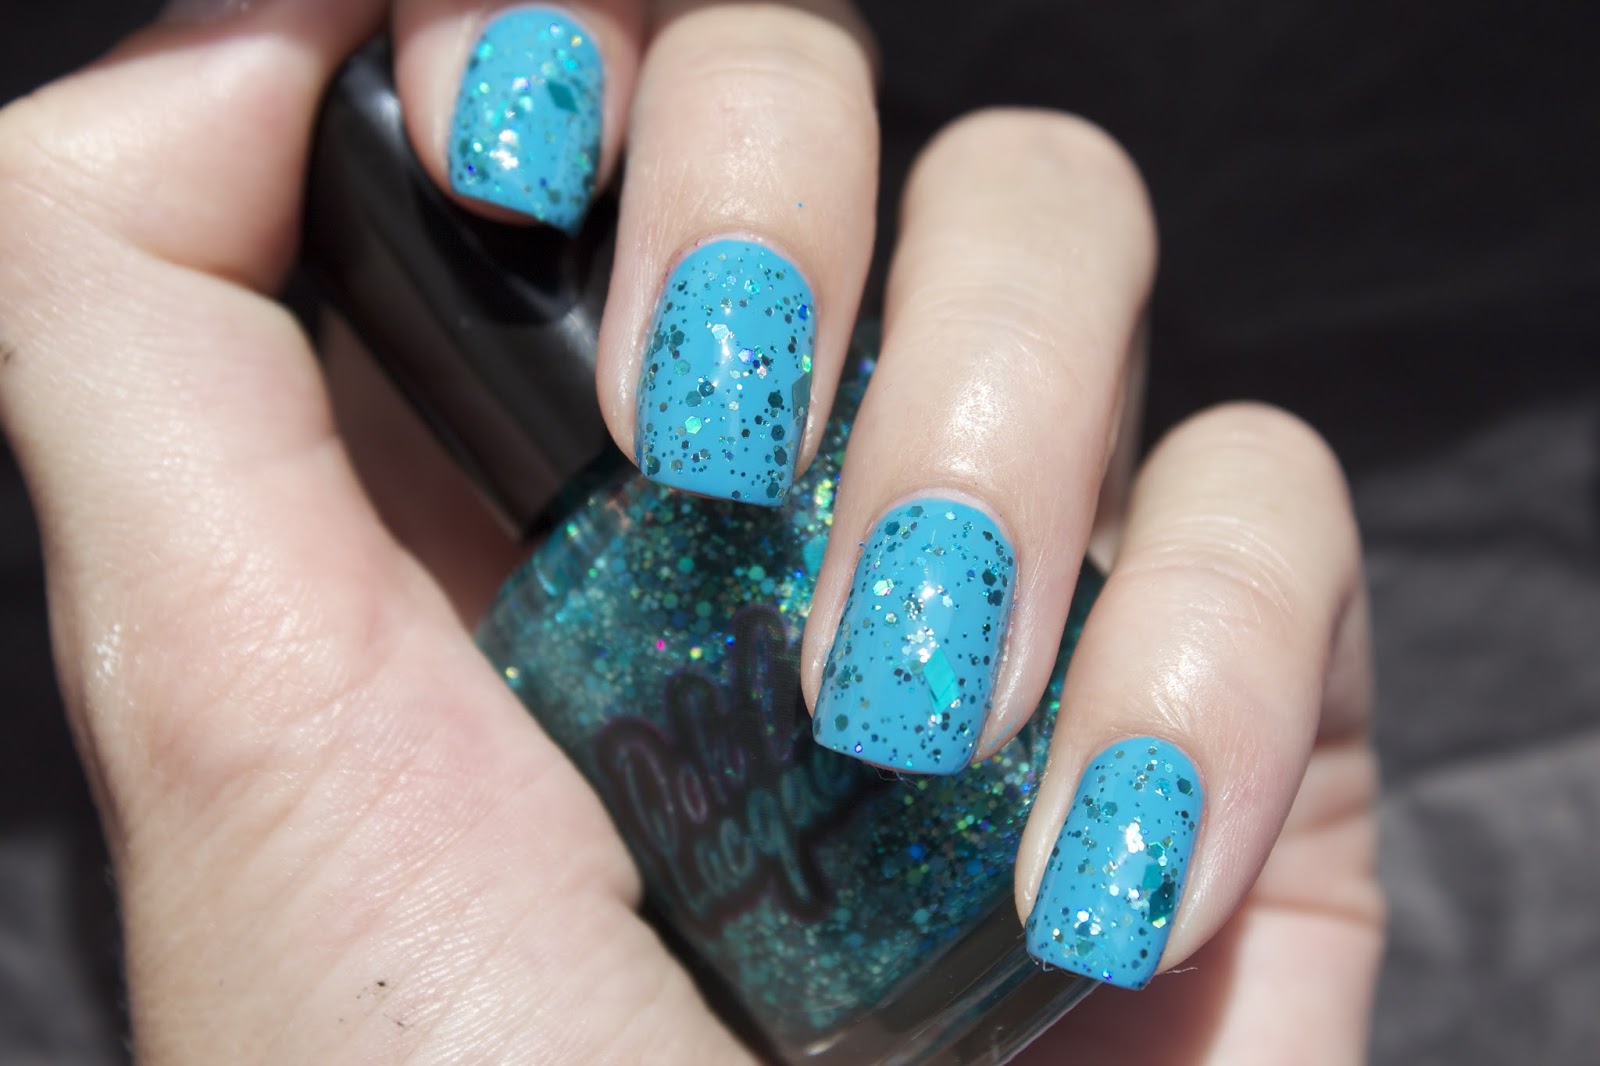 Maren and Nails!: OohLaLacquer